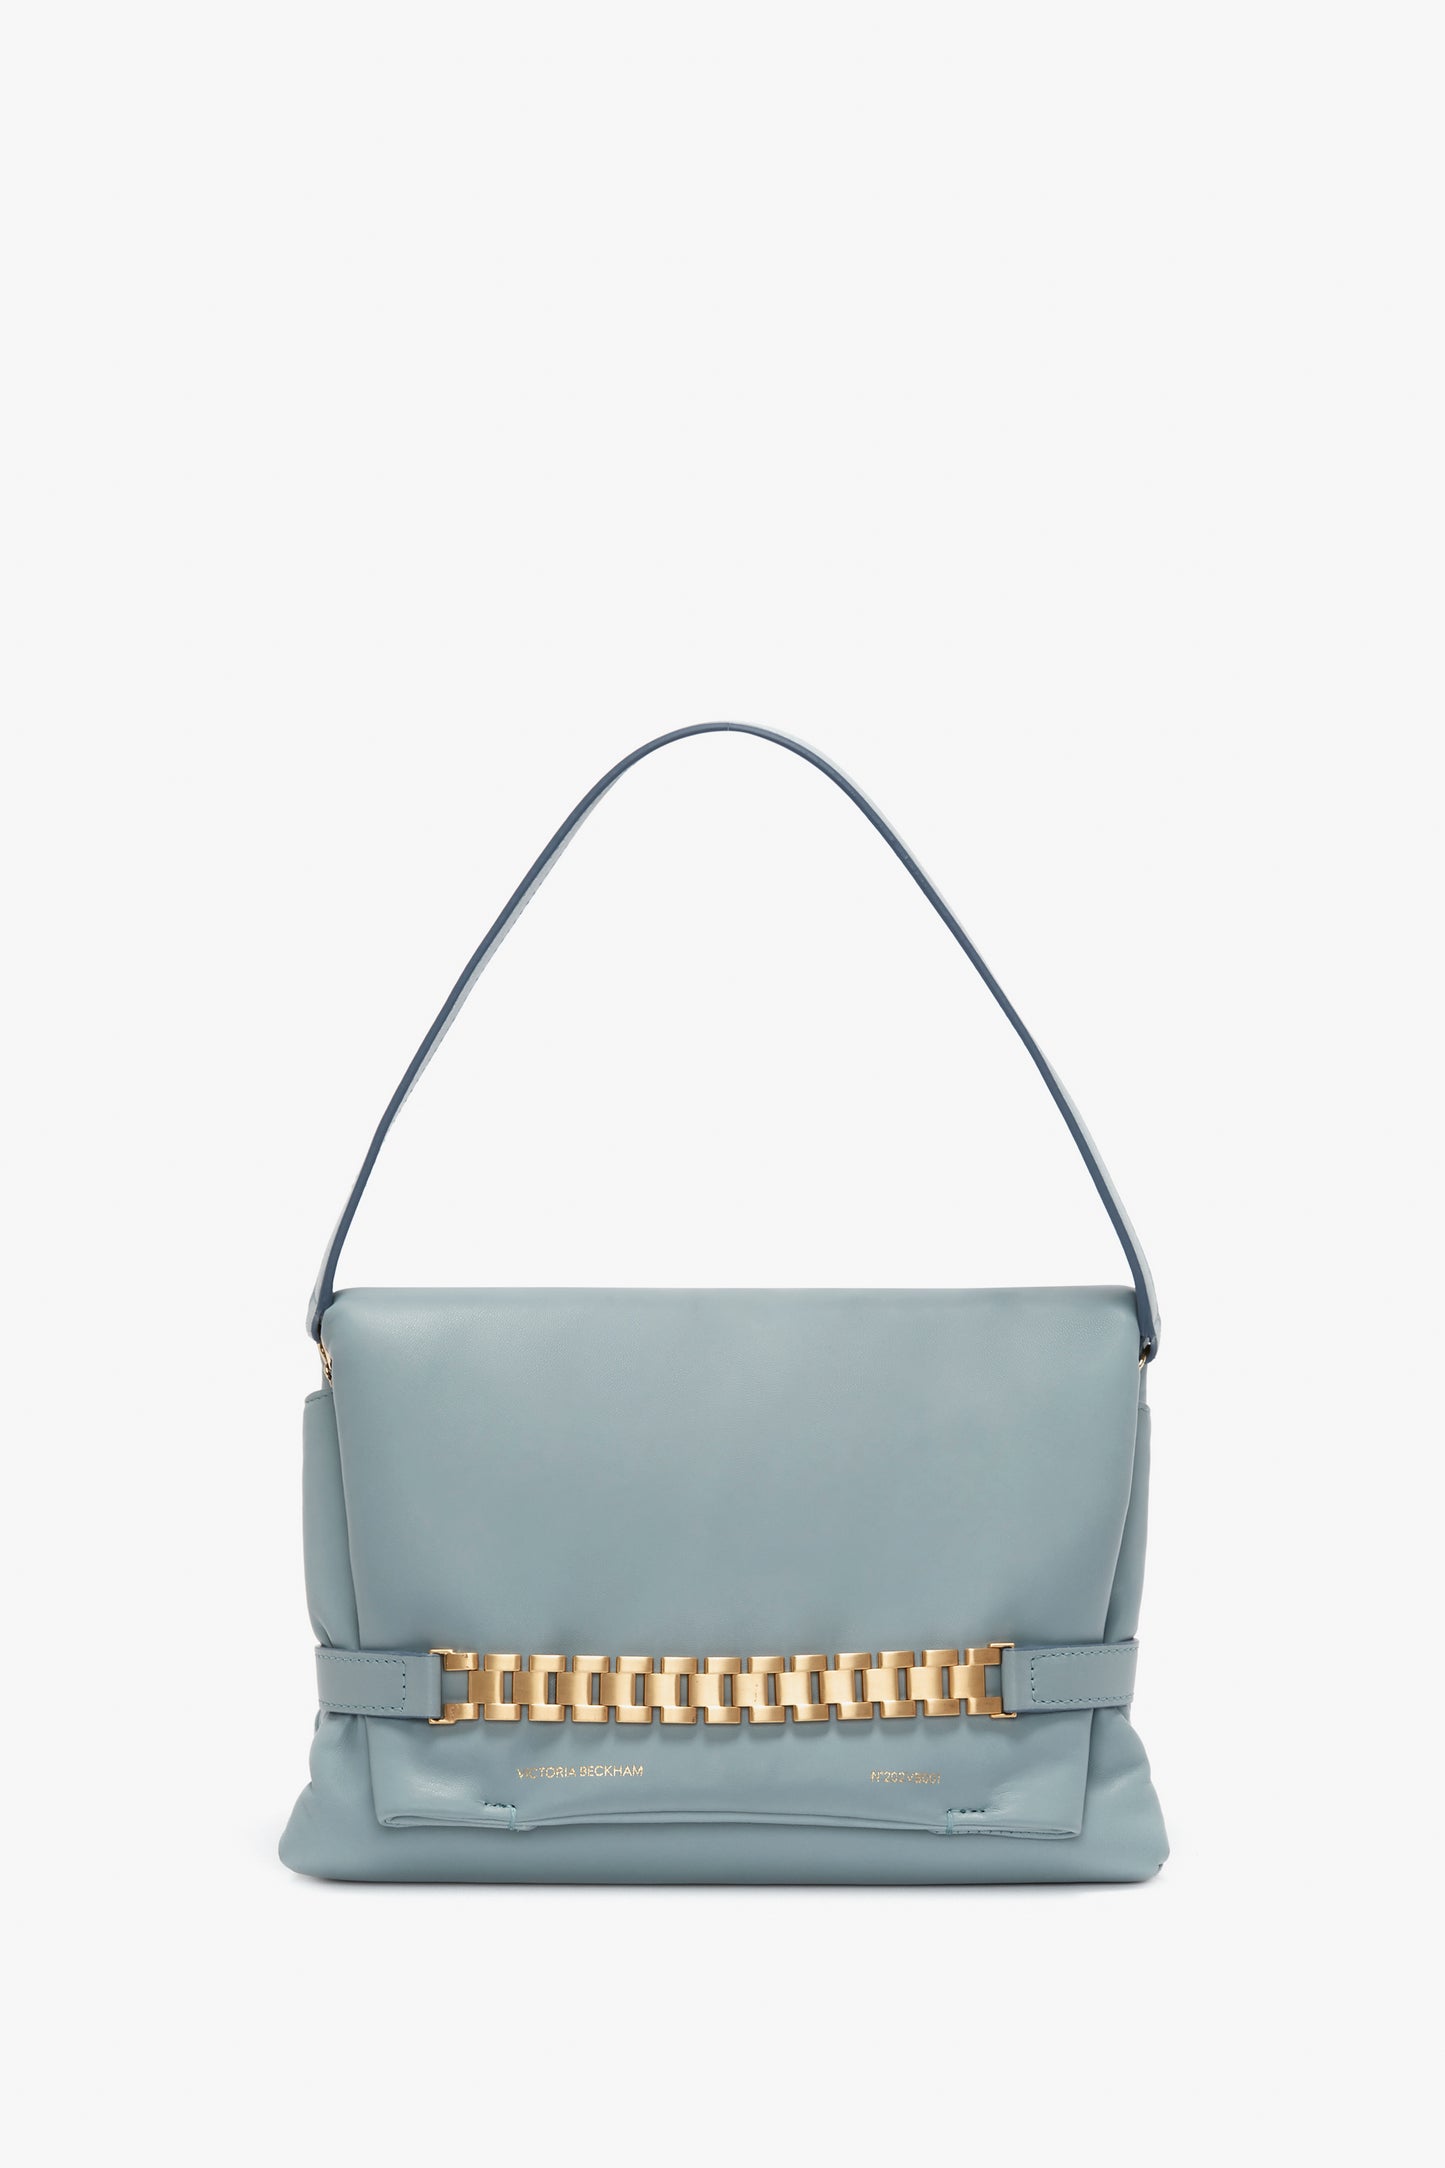 A pale blue Victoria Beckham nappa leather handbag featuring a single handle and a decorative signature gold chain across the front, displayed against a white background.